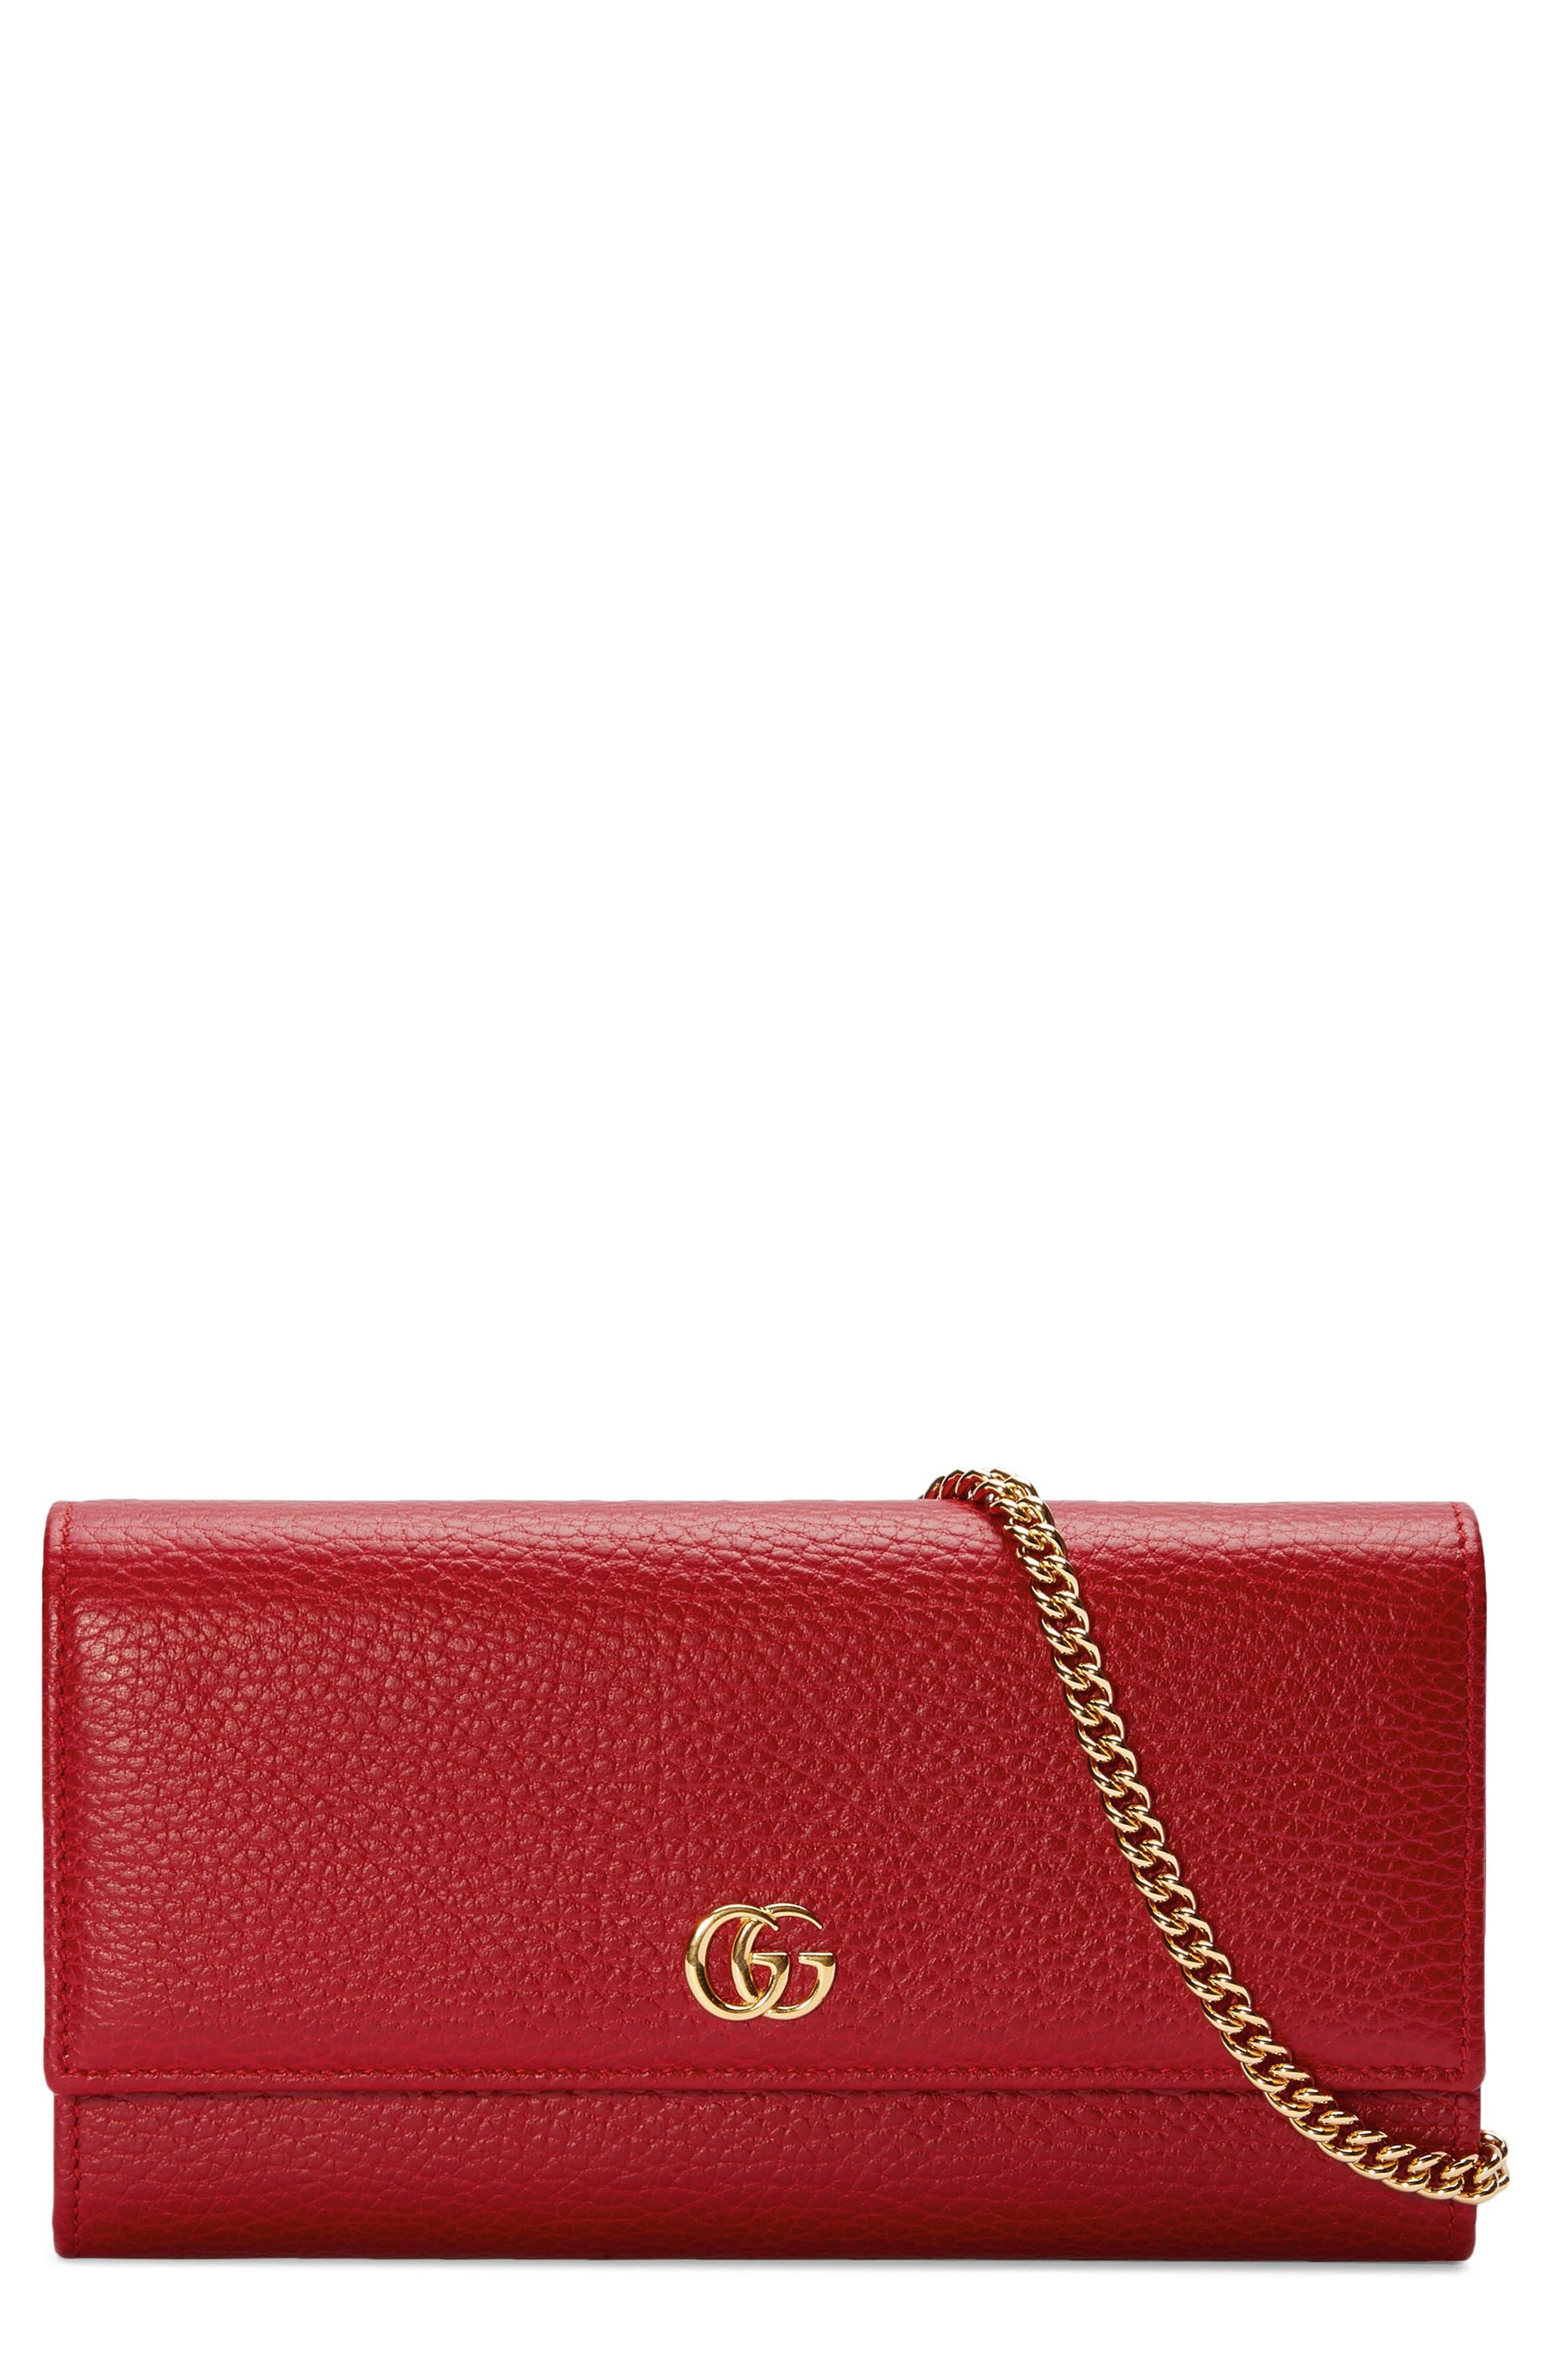 Gucci Petite Marmont Wallet On Chain in Red - Save 3% - Lyst